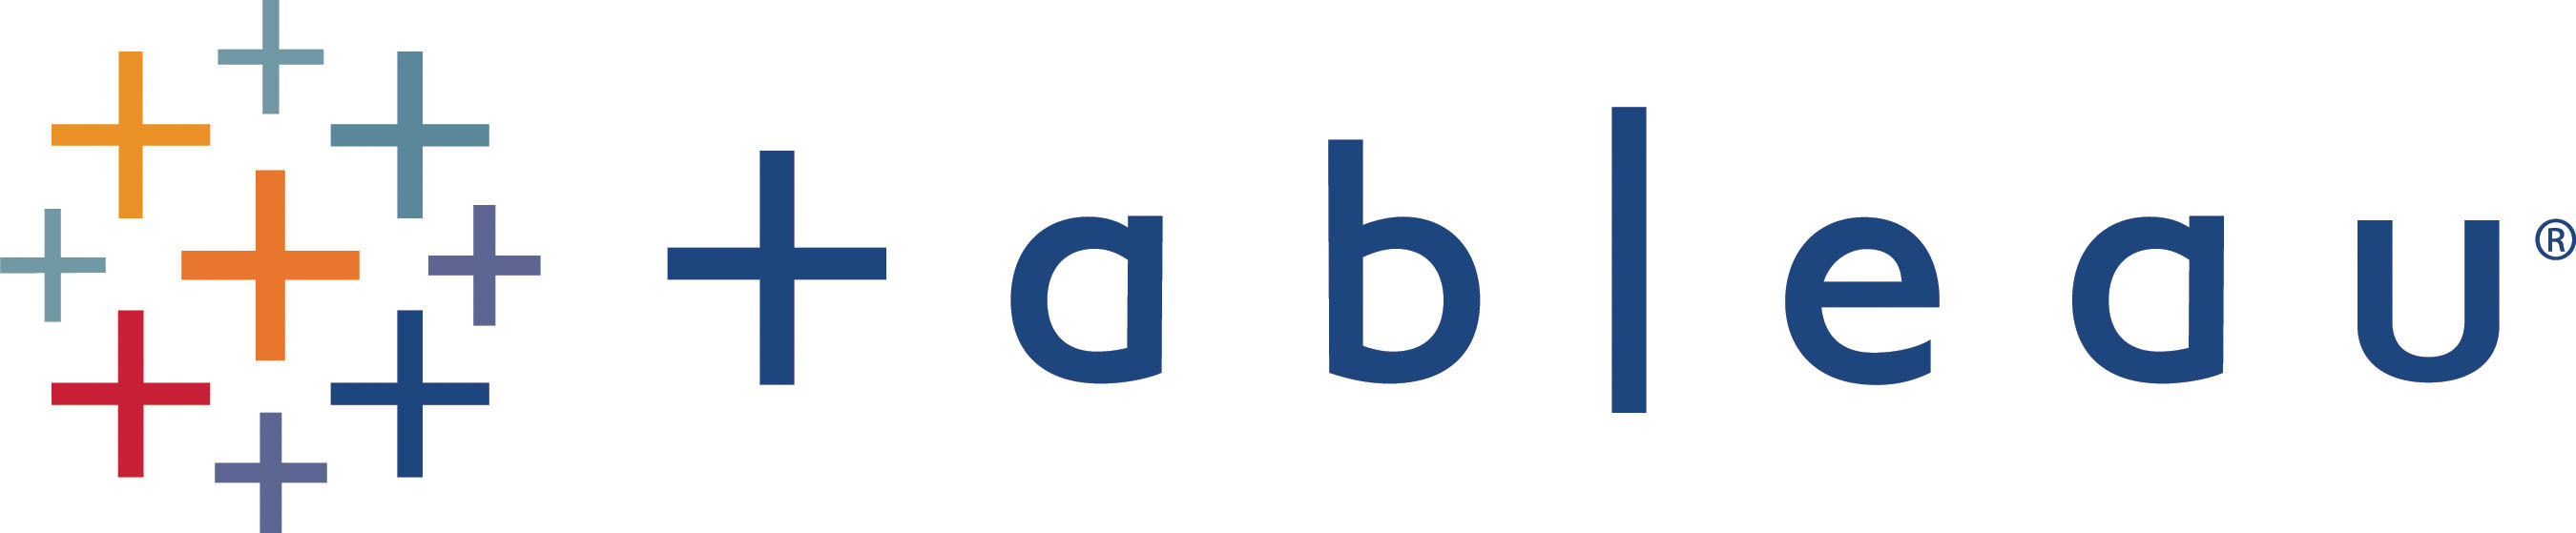 Tableau Reports Q4 and Fiscal Year 2015 Financial Results